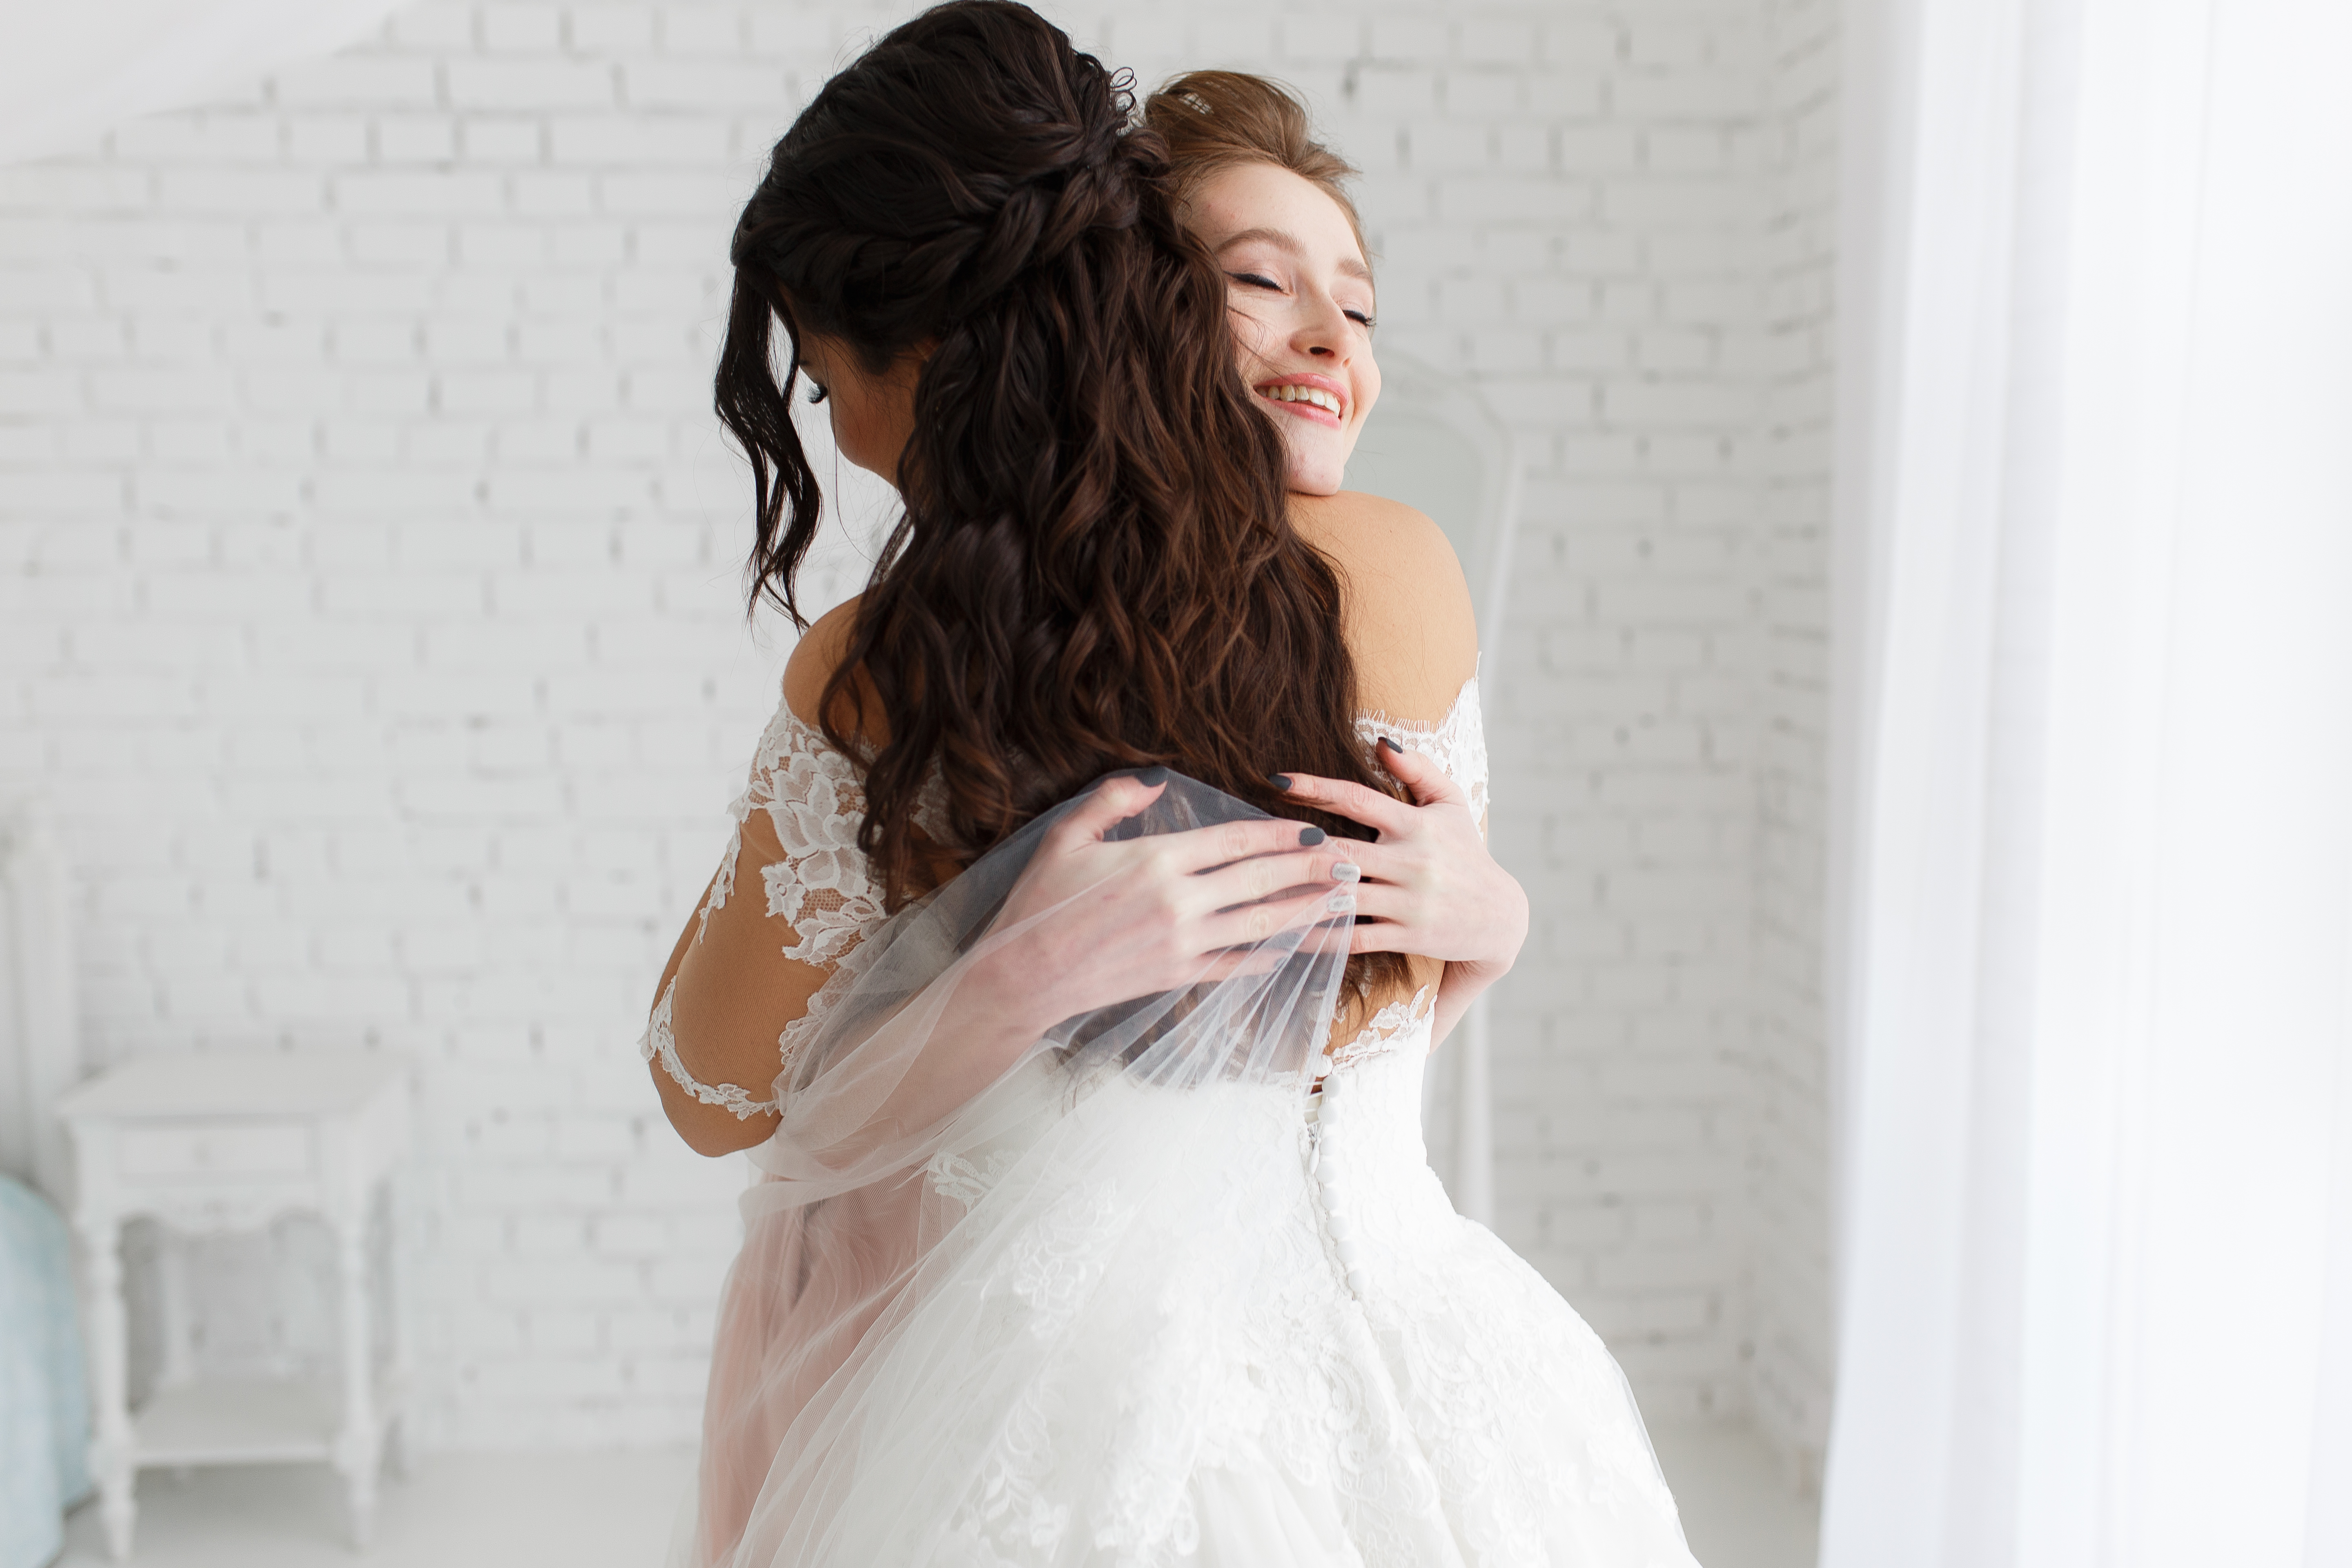 A bride hugging maid of honor | Source: Getty Images